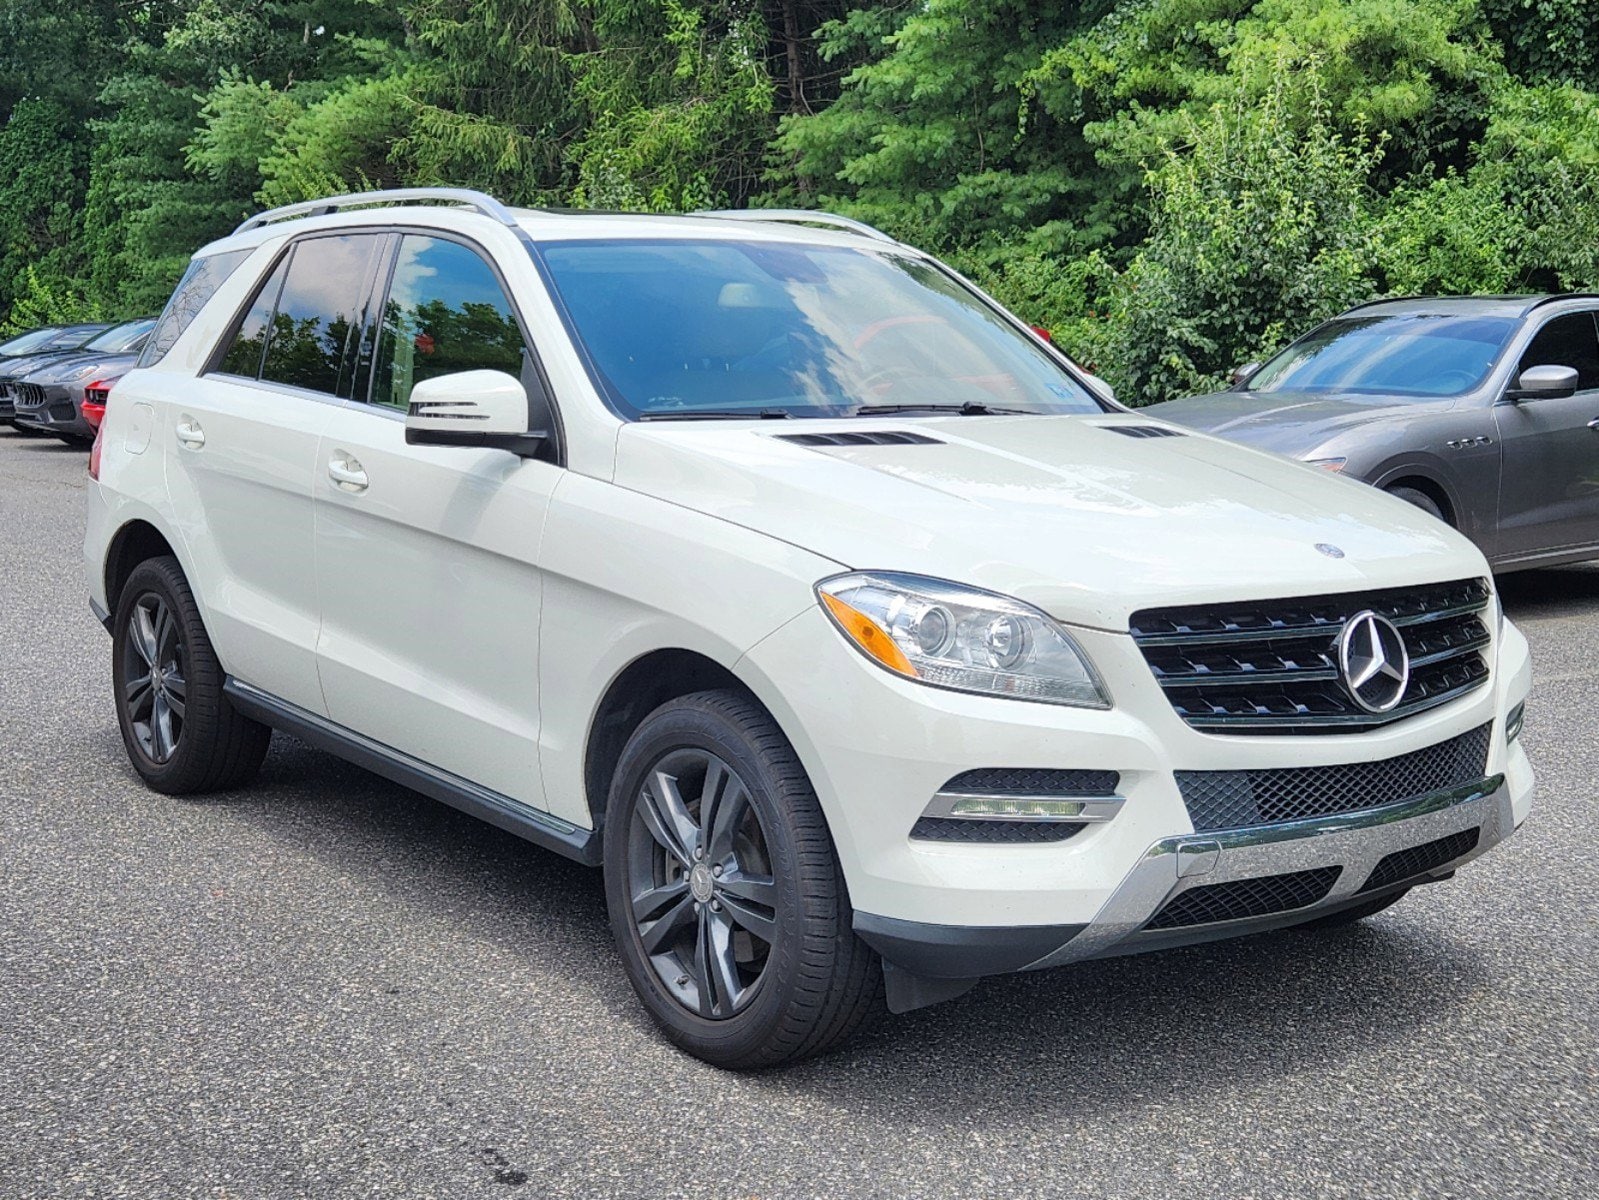 Used 2013 Mercedes-Benz M-Class ML350 with VIN 4JGDA5HB1DA203895 for sale in Chadds Ford, PA